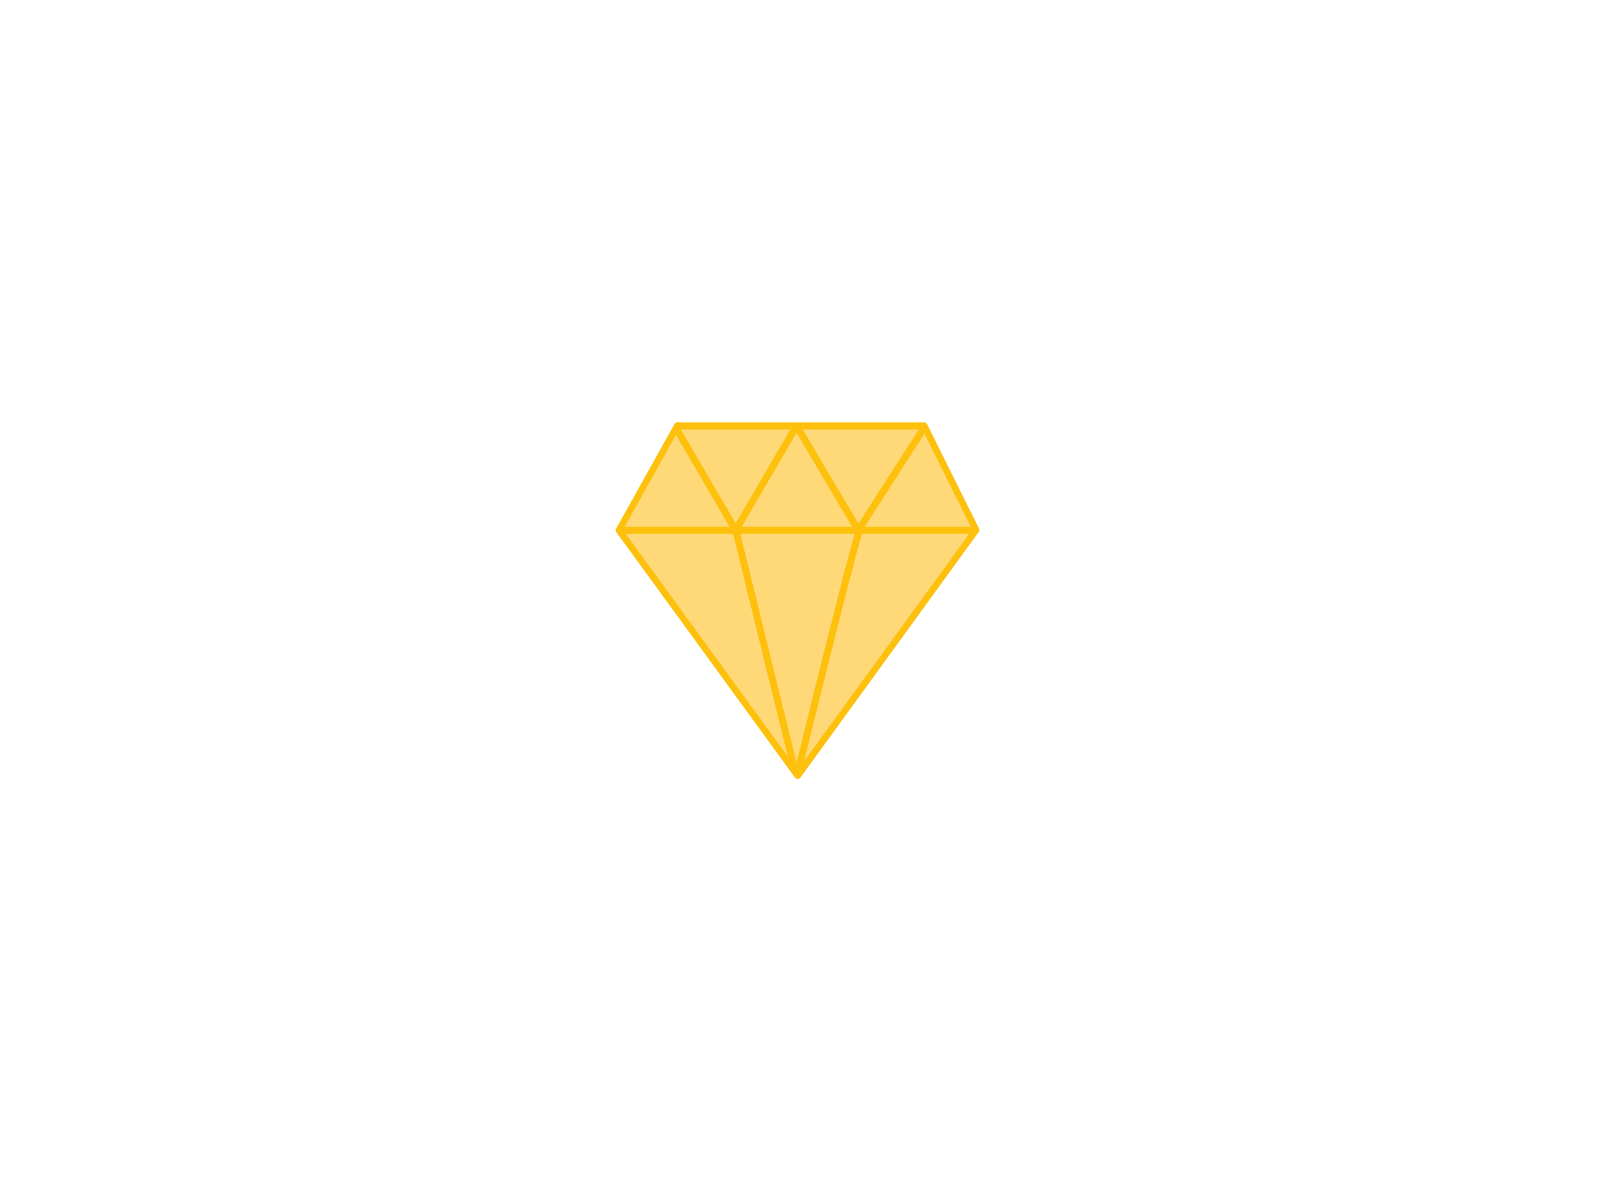 Faux 3D Diamond 2d animation animation animation after effects diamond fake3d gif illustration loading animation loop motiongraphics spinning yellow